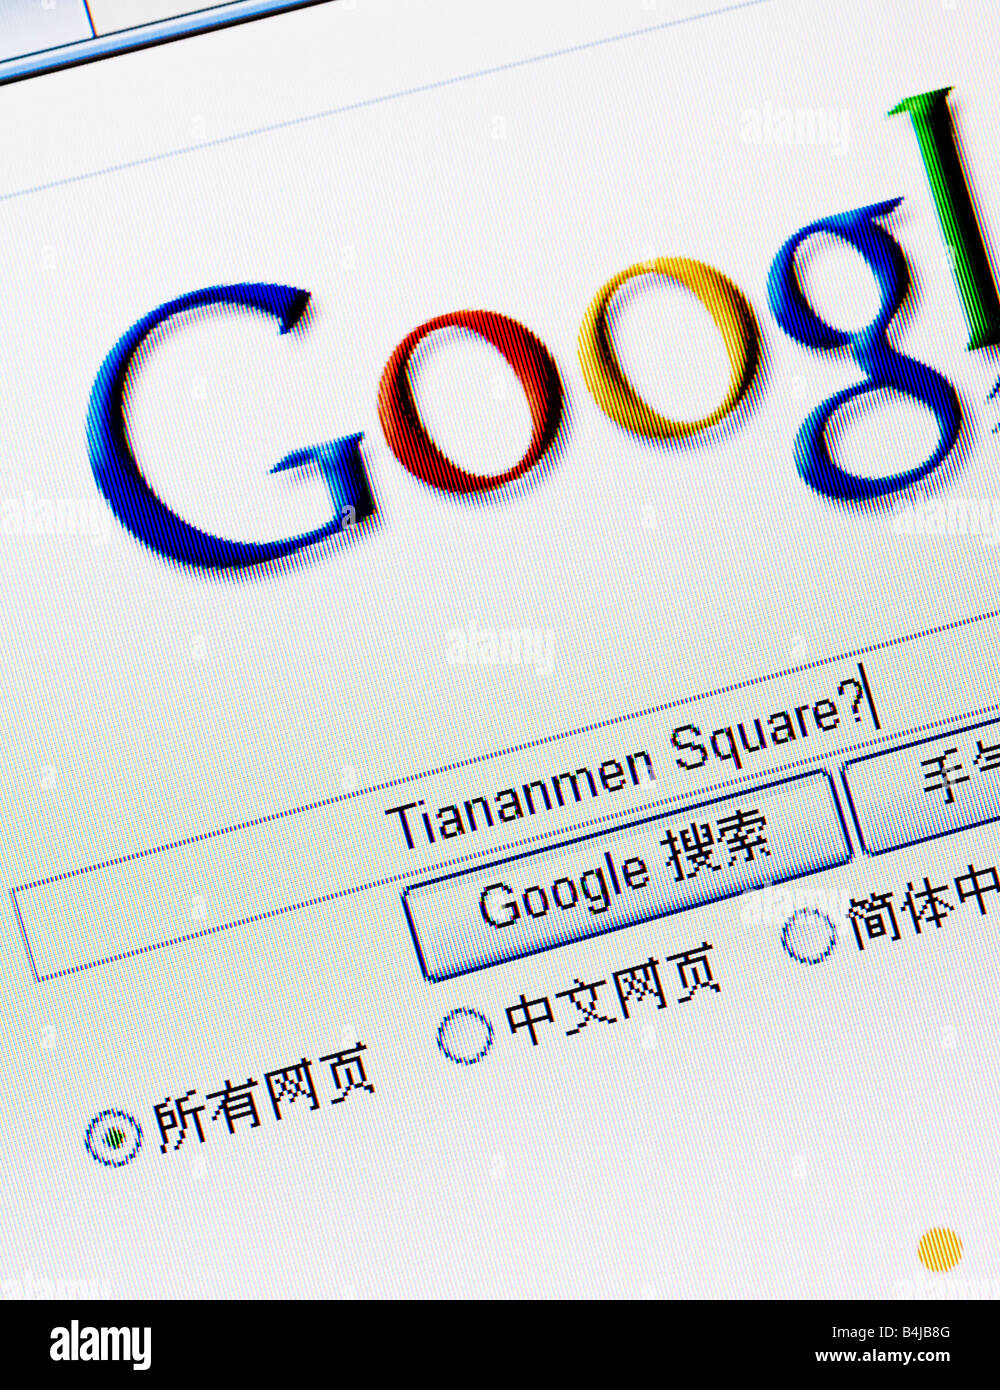 Google China website splash screen and logo close up with search for Tiananmen Square Stock Photo